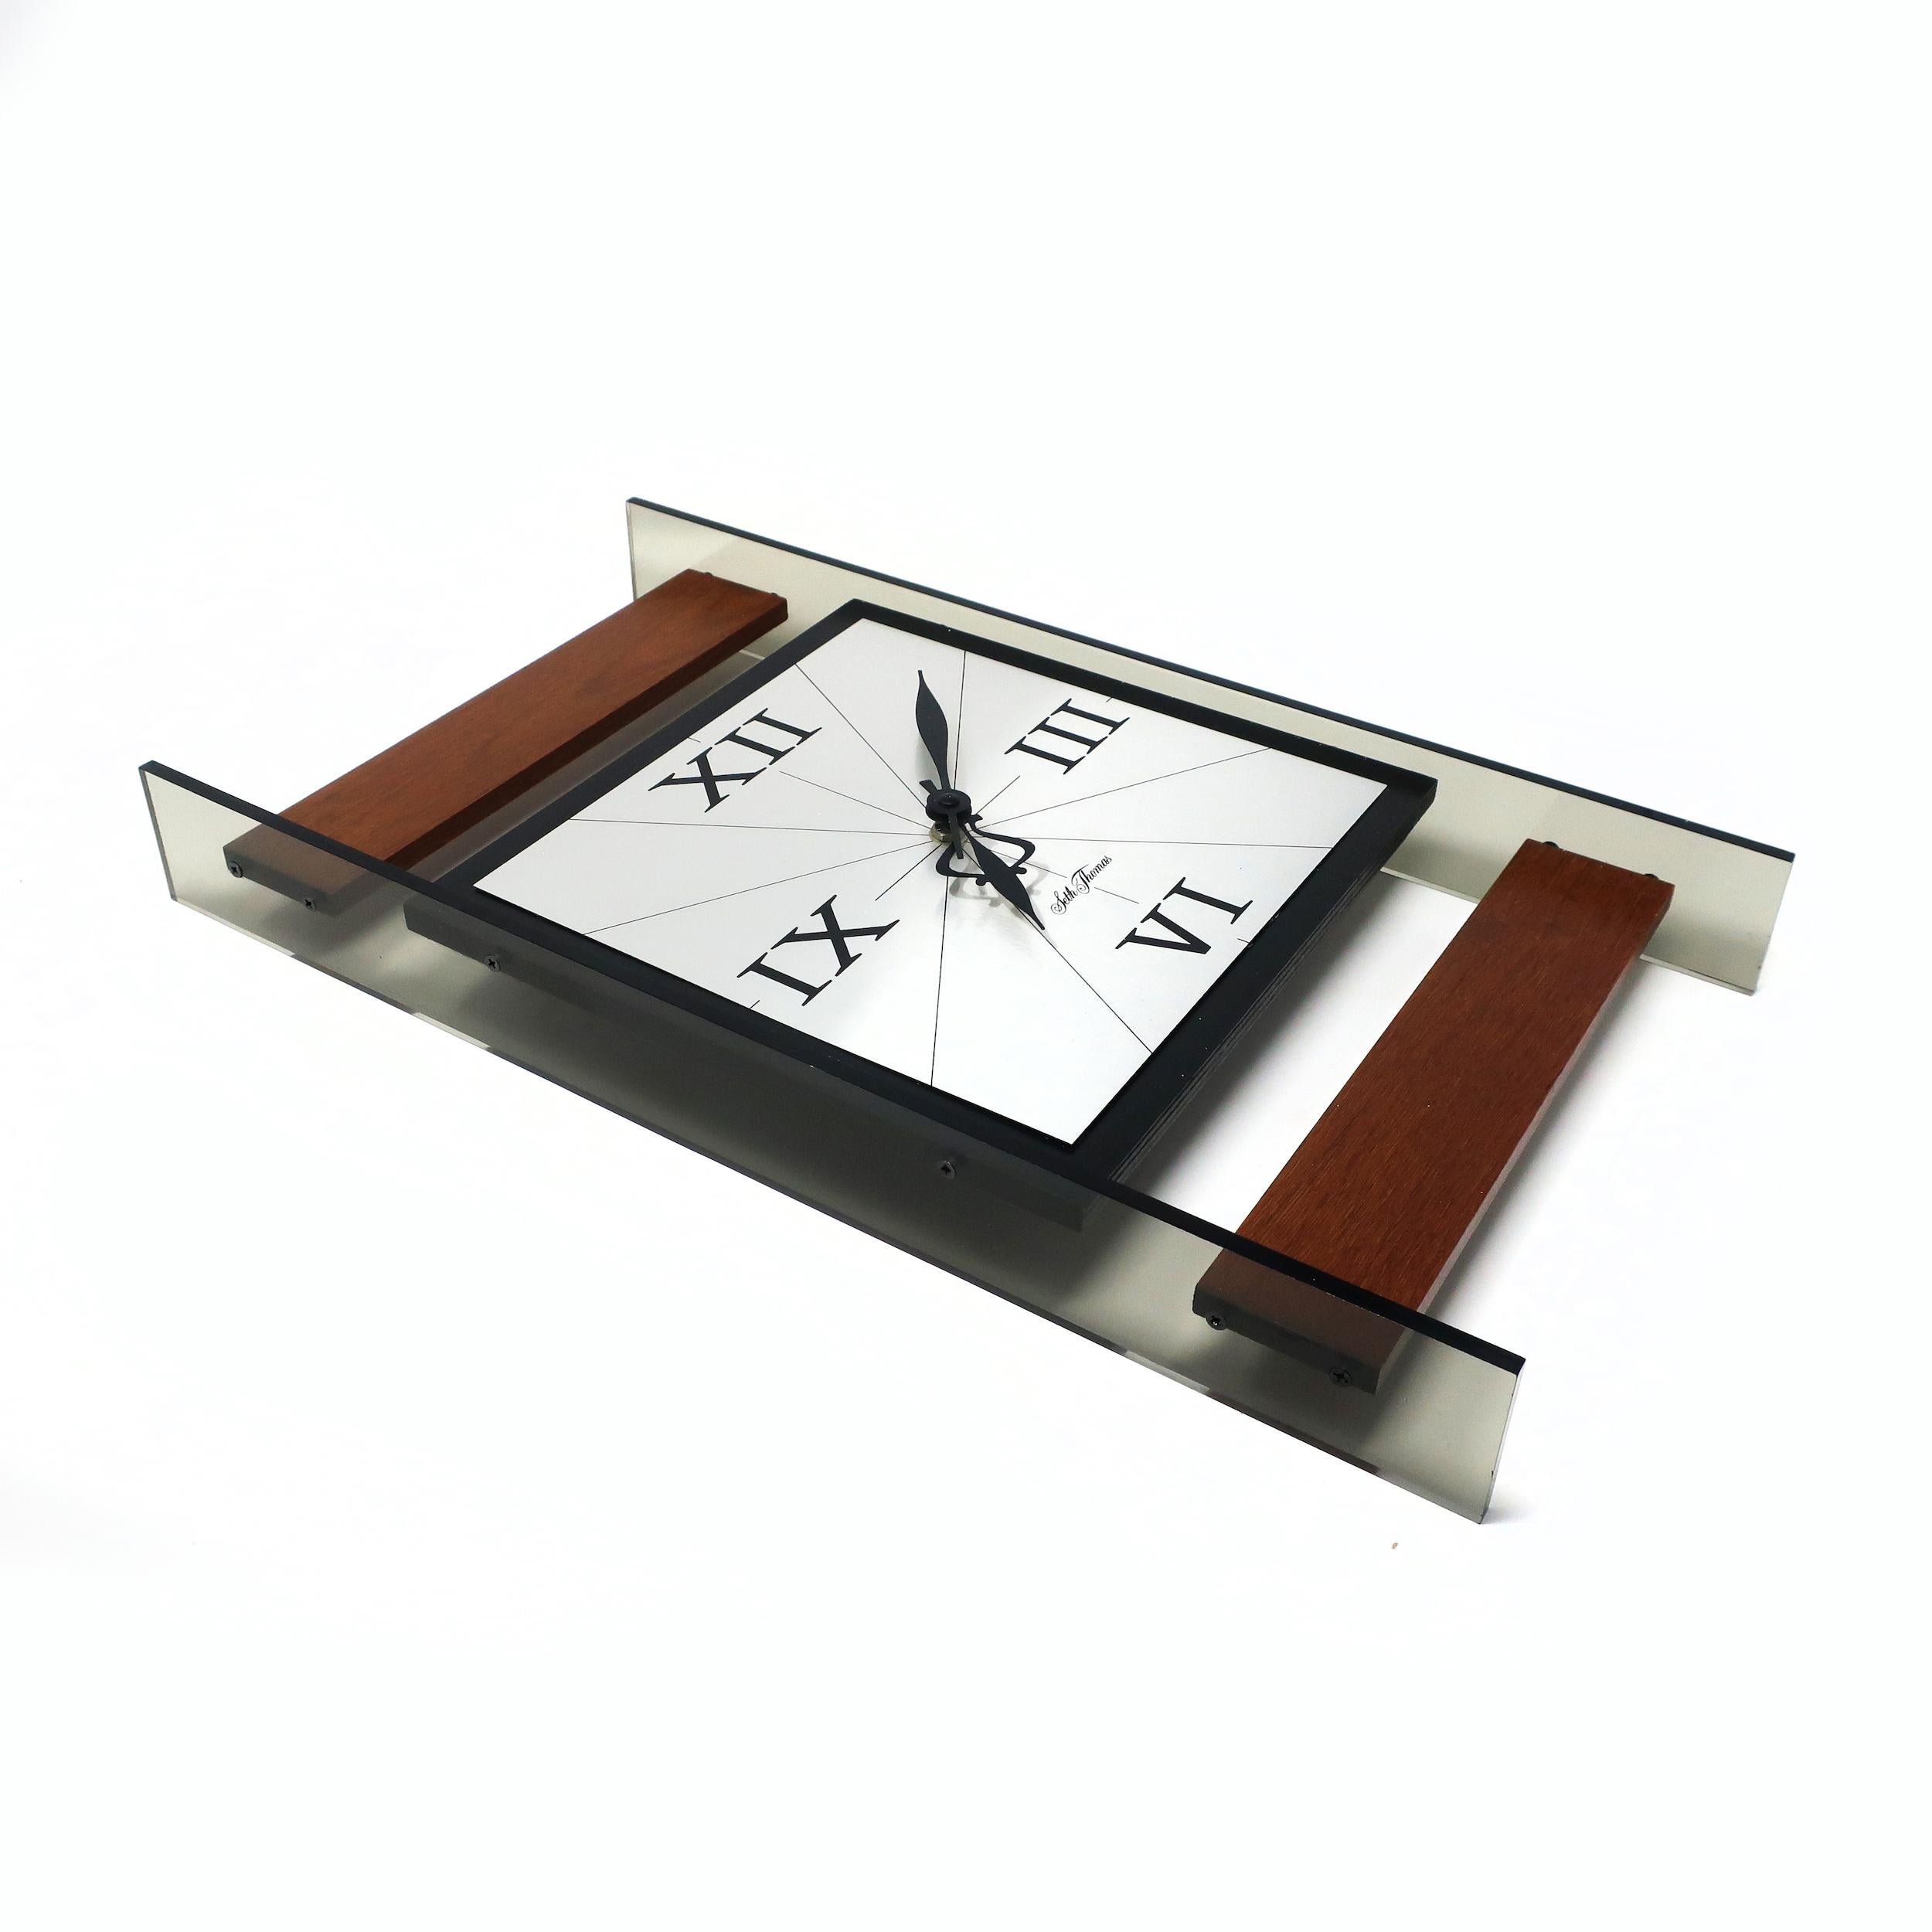 A classically mid-century modern Seth Thomas wall clock. Made of smoked lucite with teak accents, silver face, and black hands. Marked 